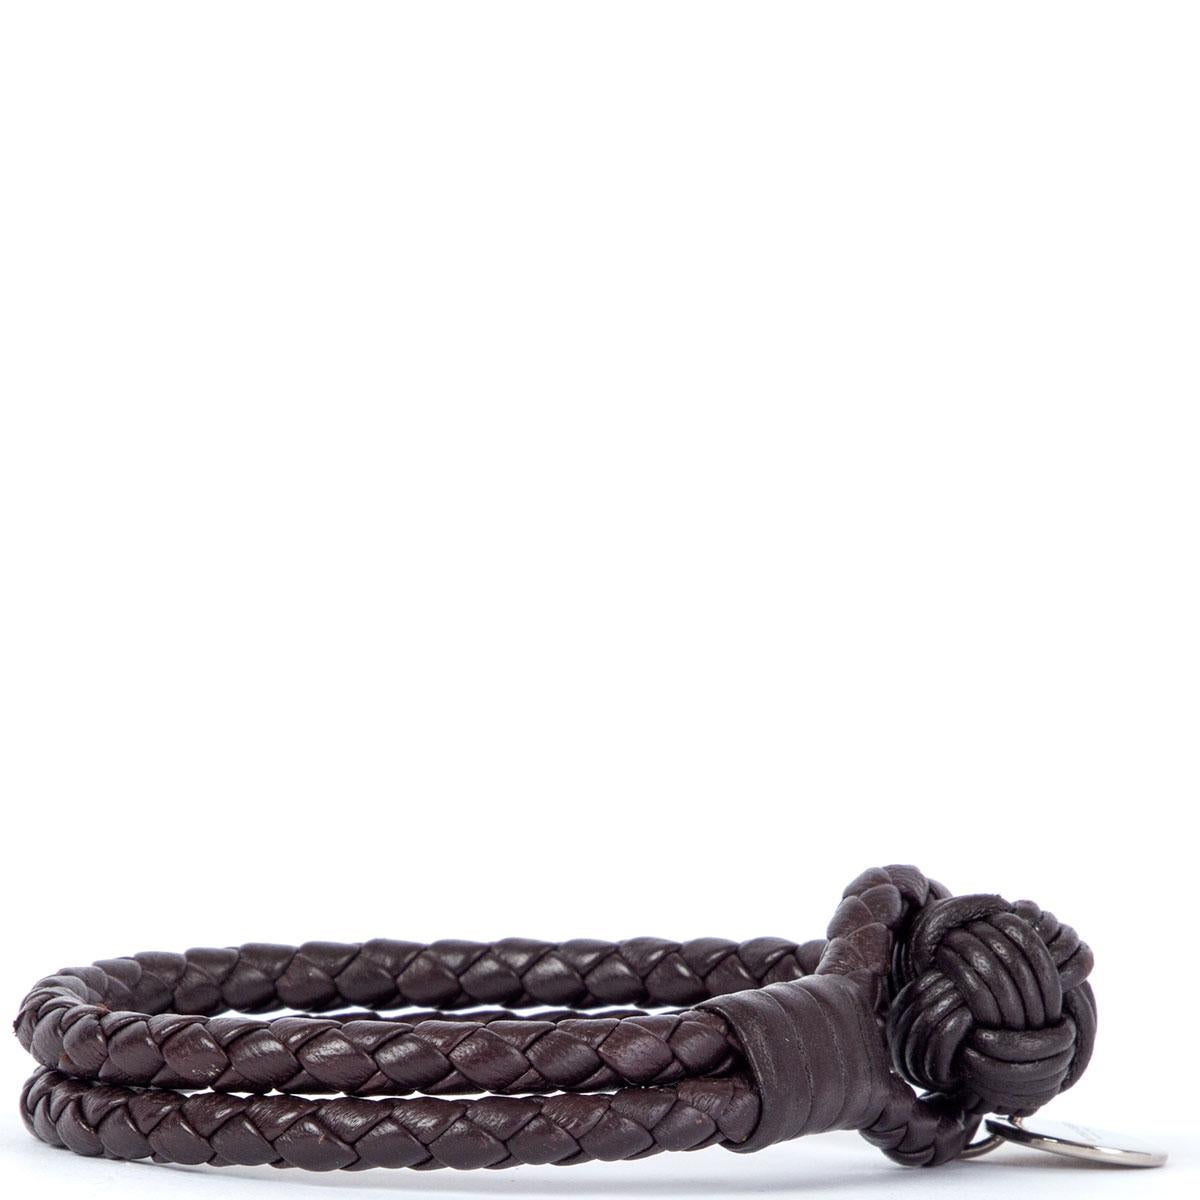 100% authentic Bottega Veneta braided bracelet in espresso brown smooth calfskin. Has been worn and is in excellent condition. 

Measurements
Width	1cm (0.4in)
Length	20cm (7.8in)

All our listings include only the listed item unless otherwise